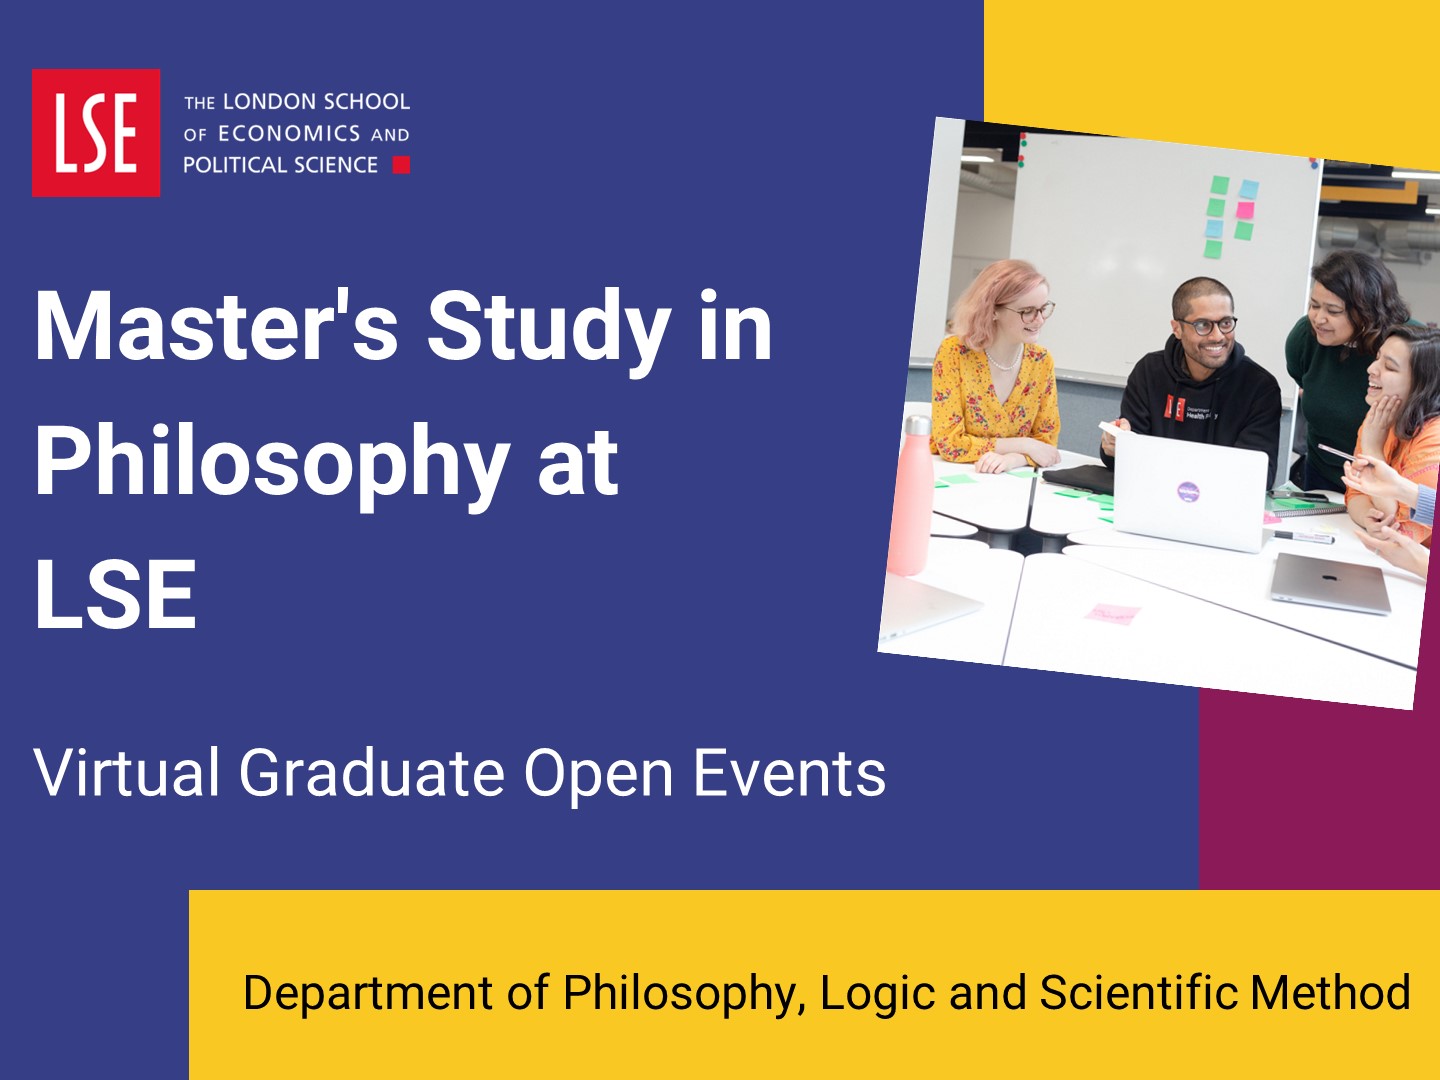 Introduction to master's Study in Philosophy at LSE